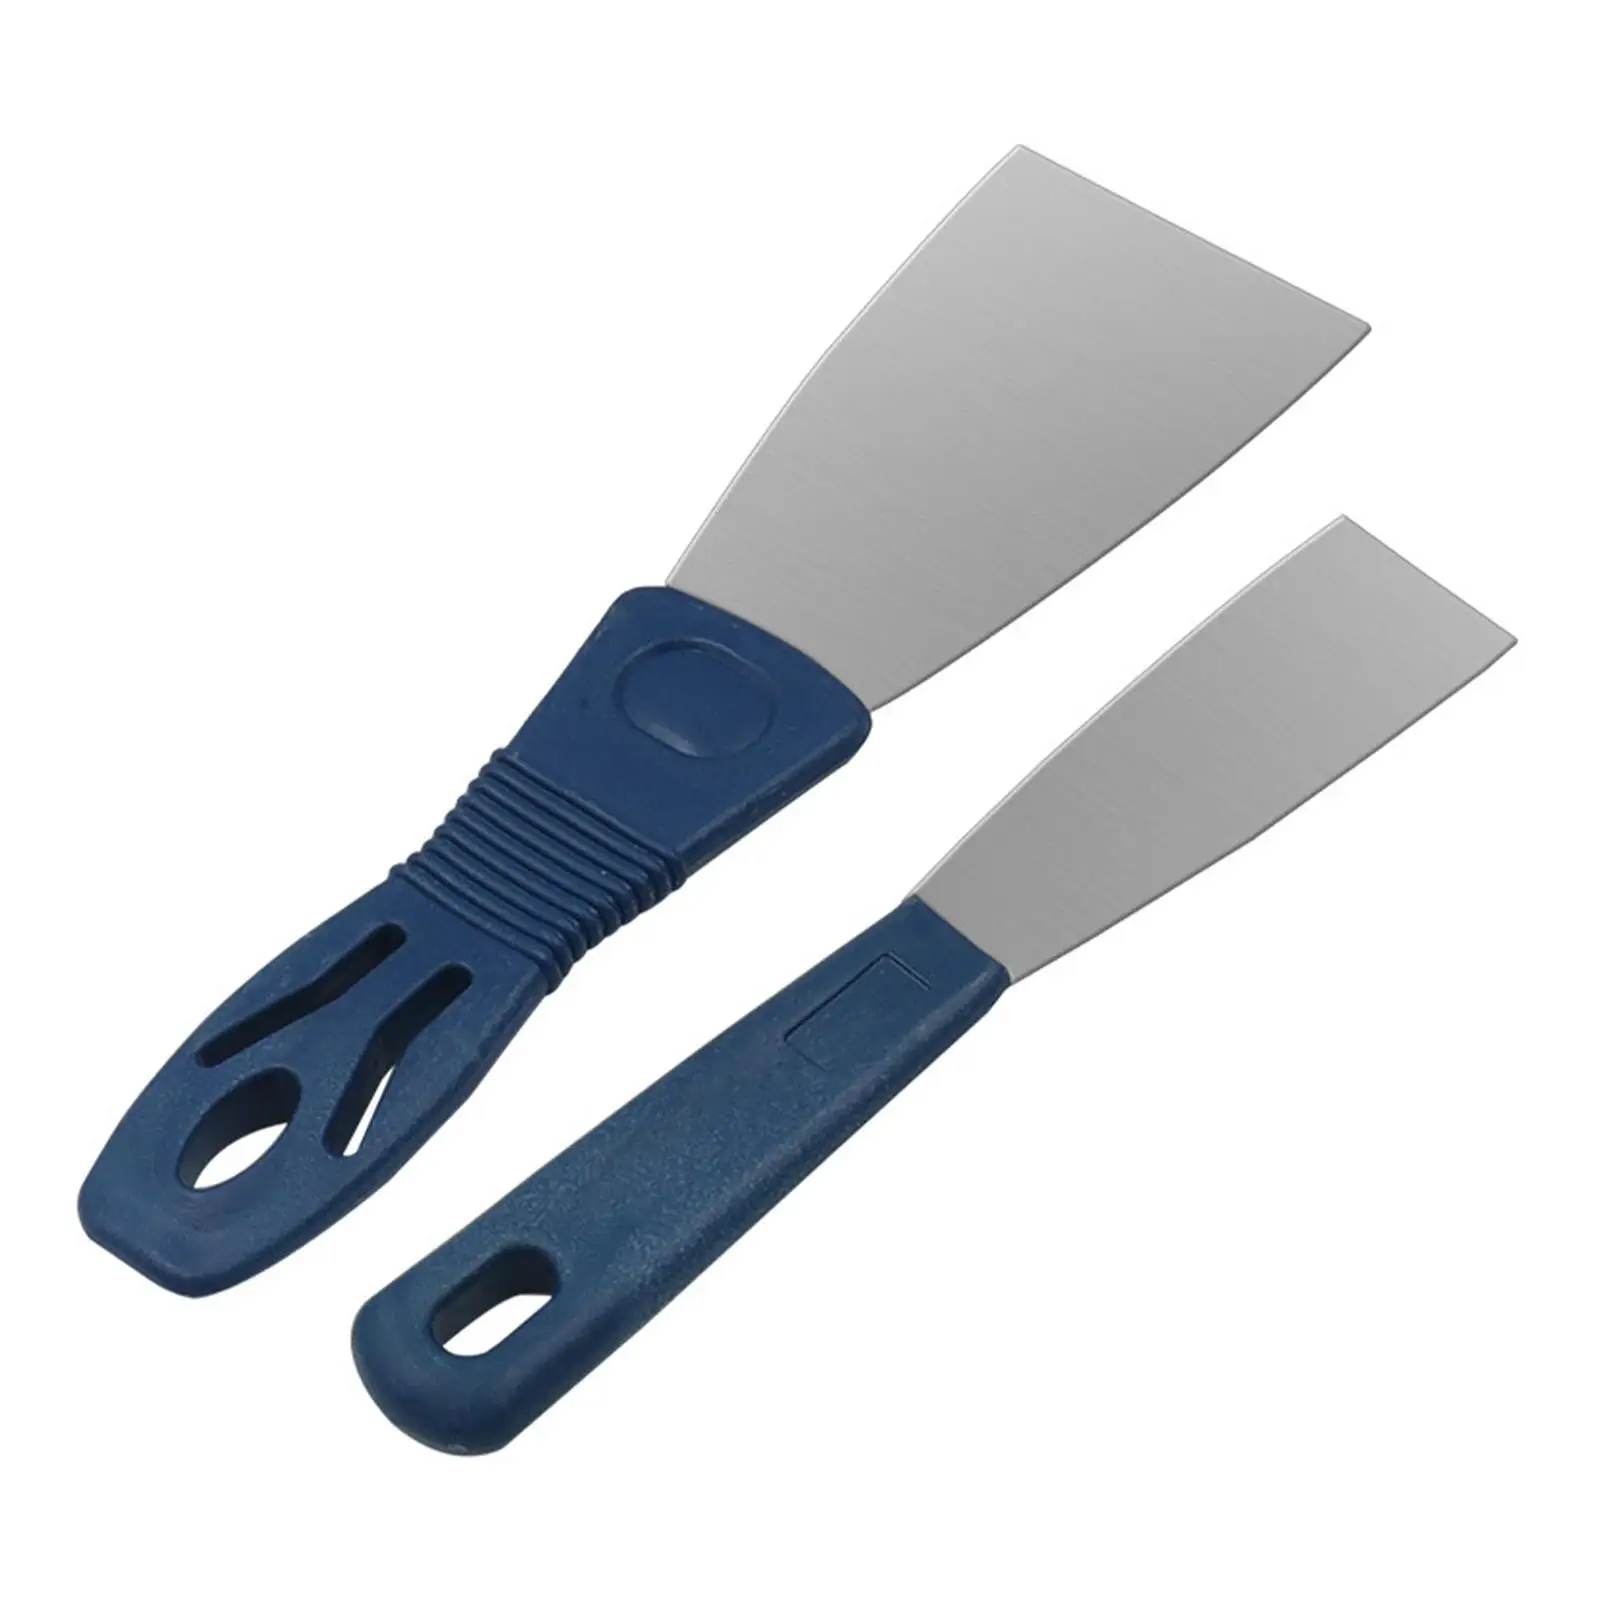 2Pcs Putty Tool Set High Carbon Steel Flexible Hand Tool for Wall Decoration Removing Wallpaper Plaster Scraping